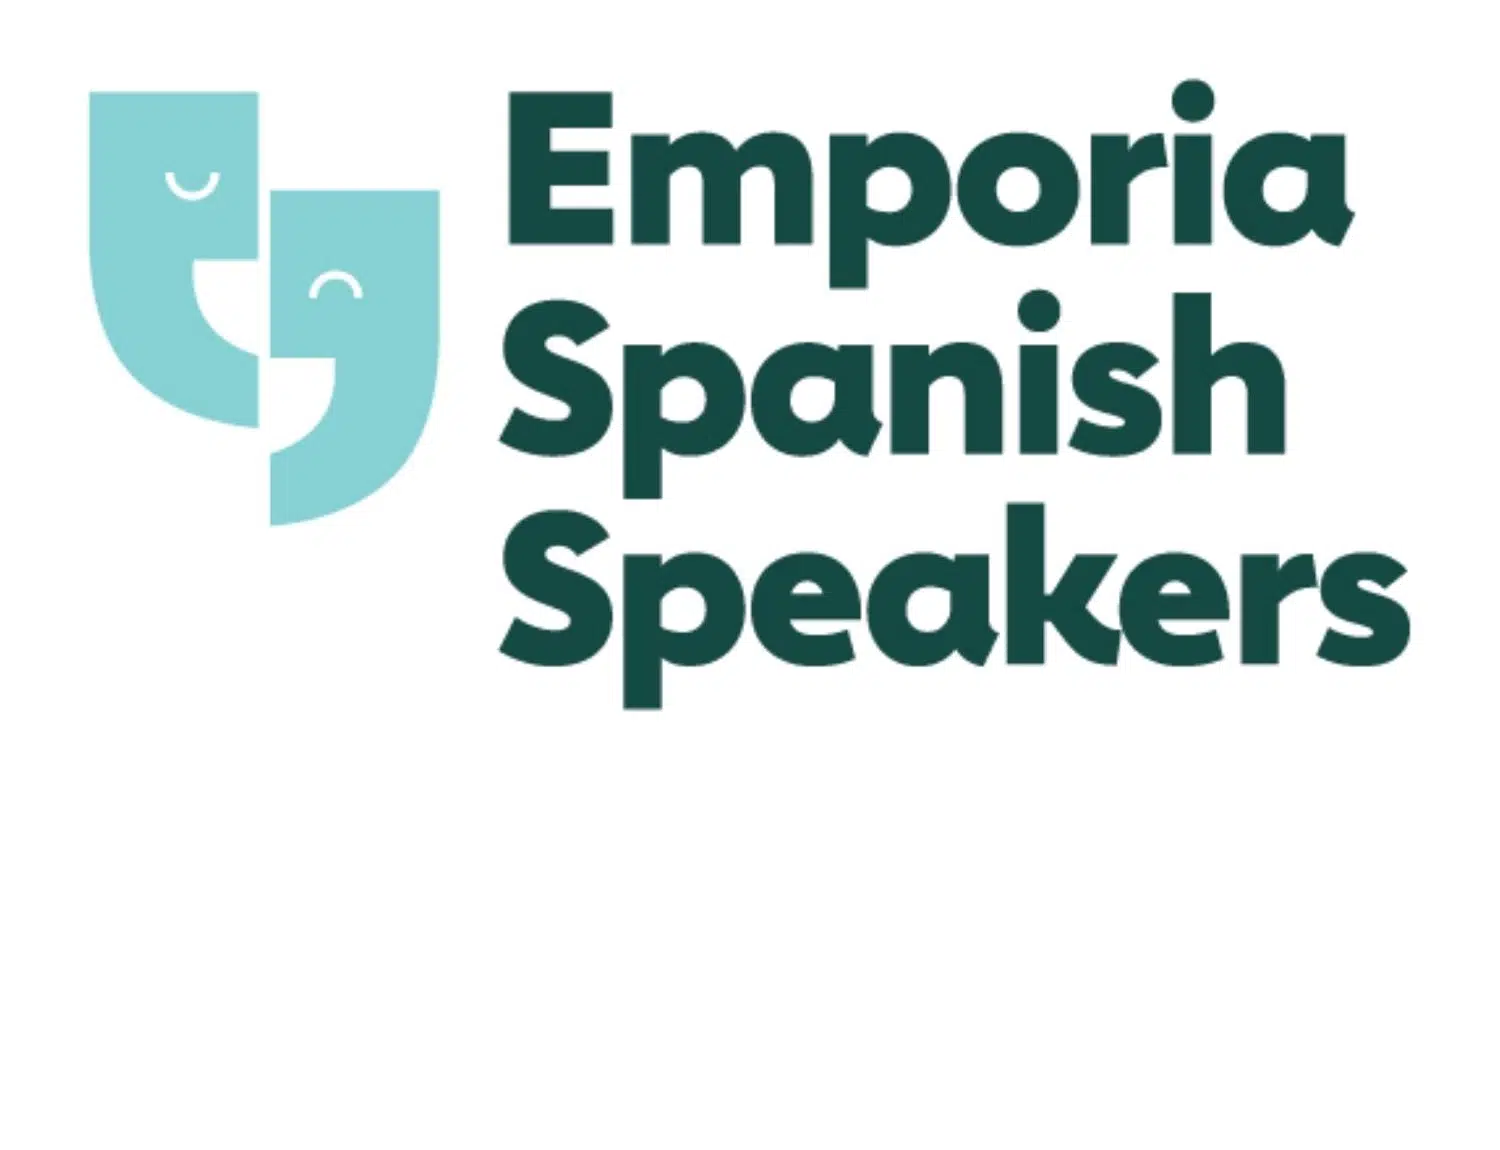 Emporia Spanish Speakers is mobilizing to bring its Spanish learning program to more communities in Kansas